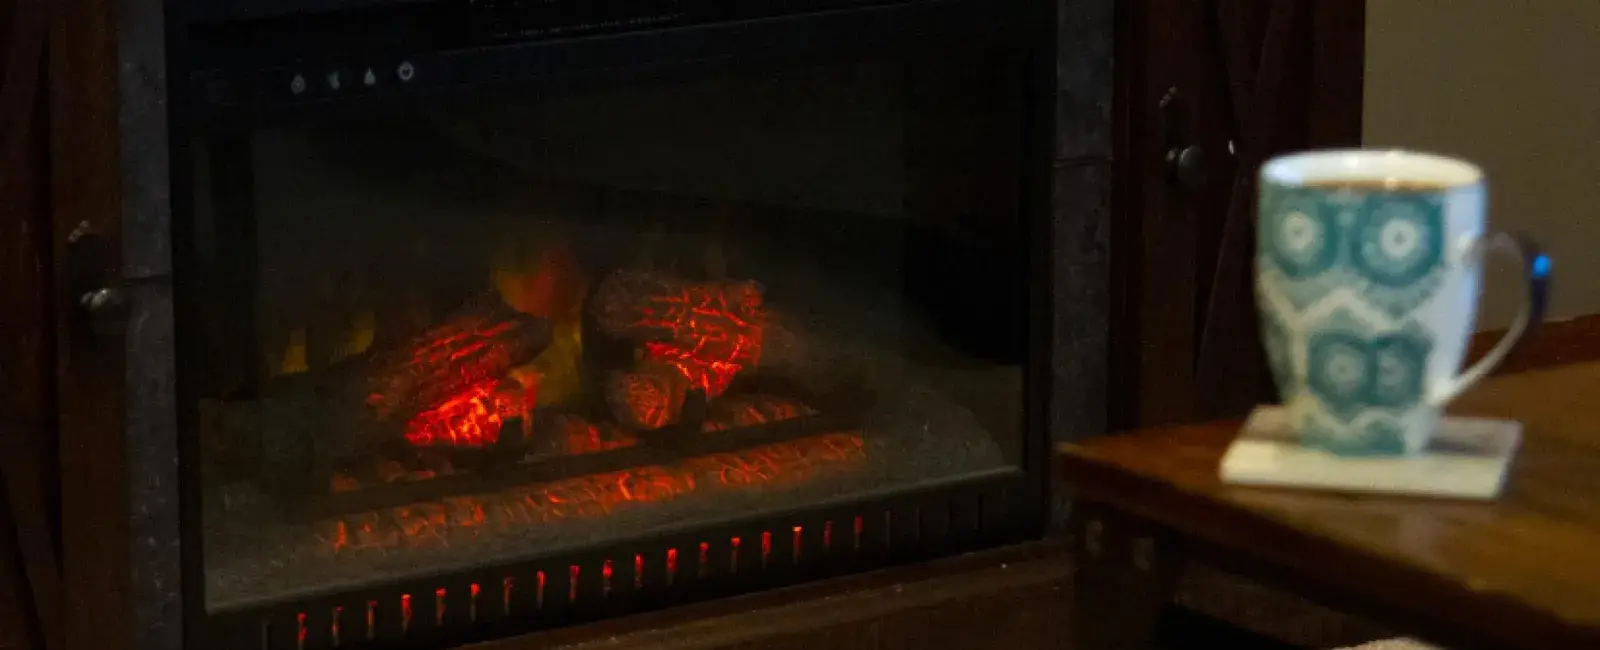 Electric Fireplace Heater Safety Tips.